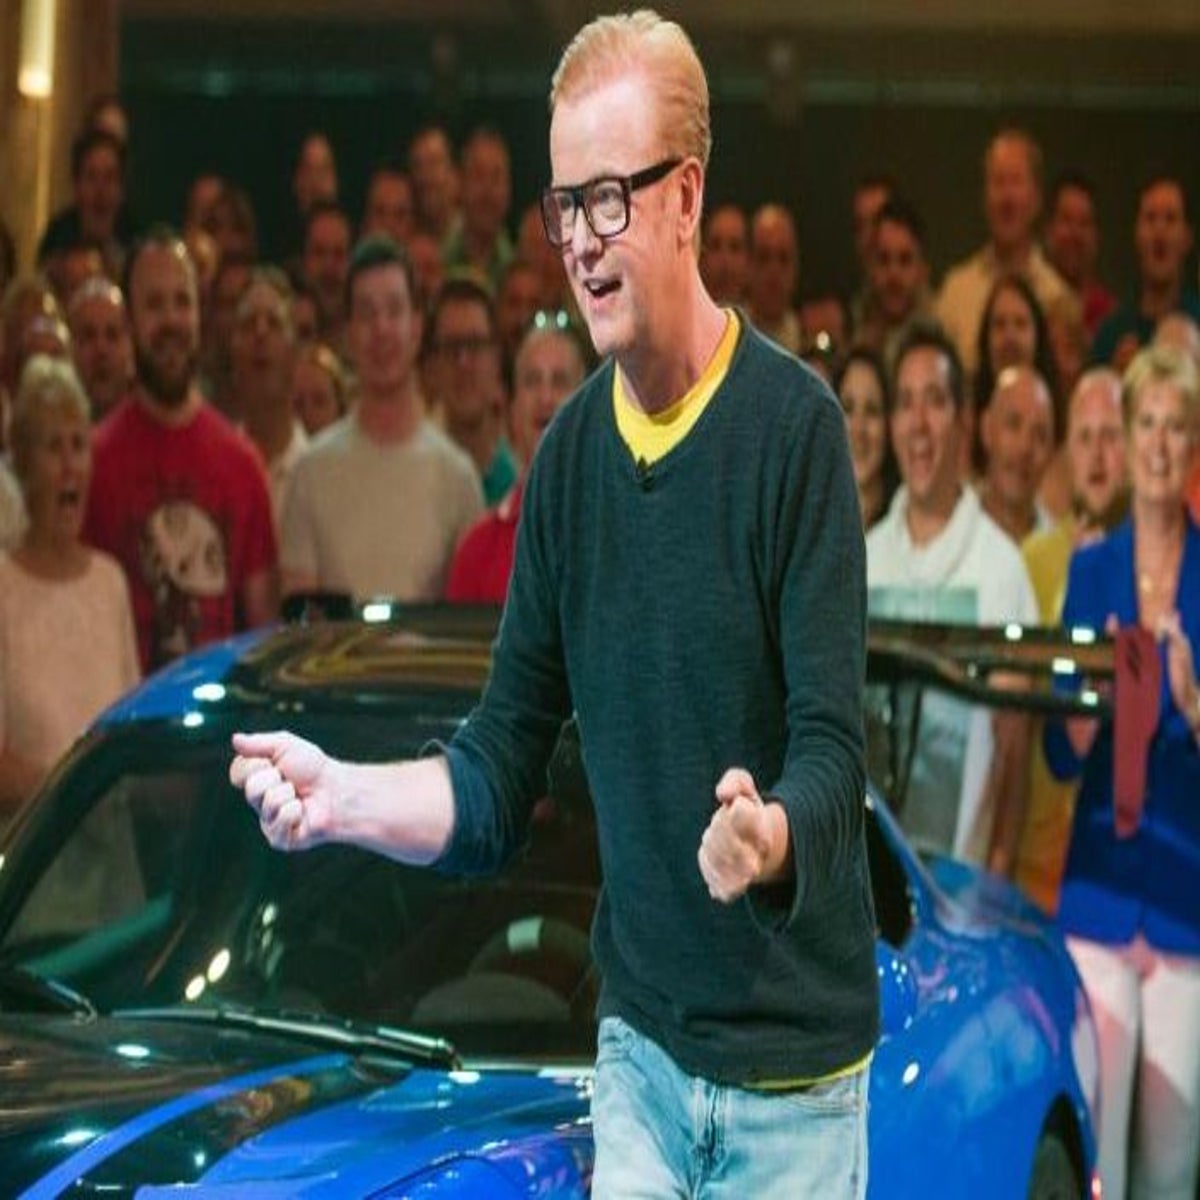 plejeforældre film volatilitet Top Gear new series: Chris Evans faces backlash from viewers for 'shouting'  through entire first episode | The Independent | The Independent